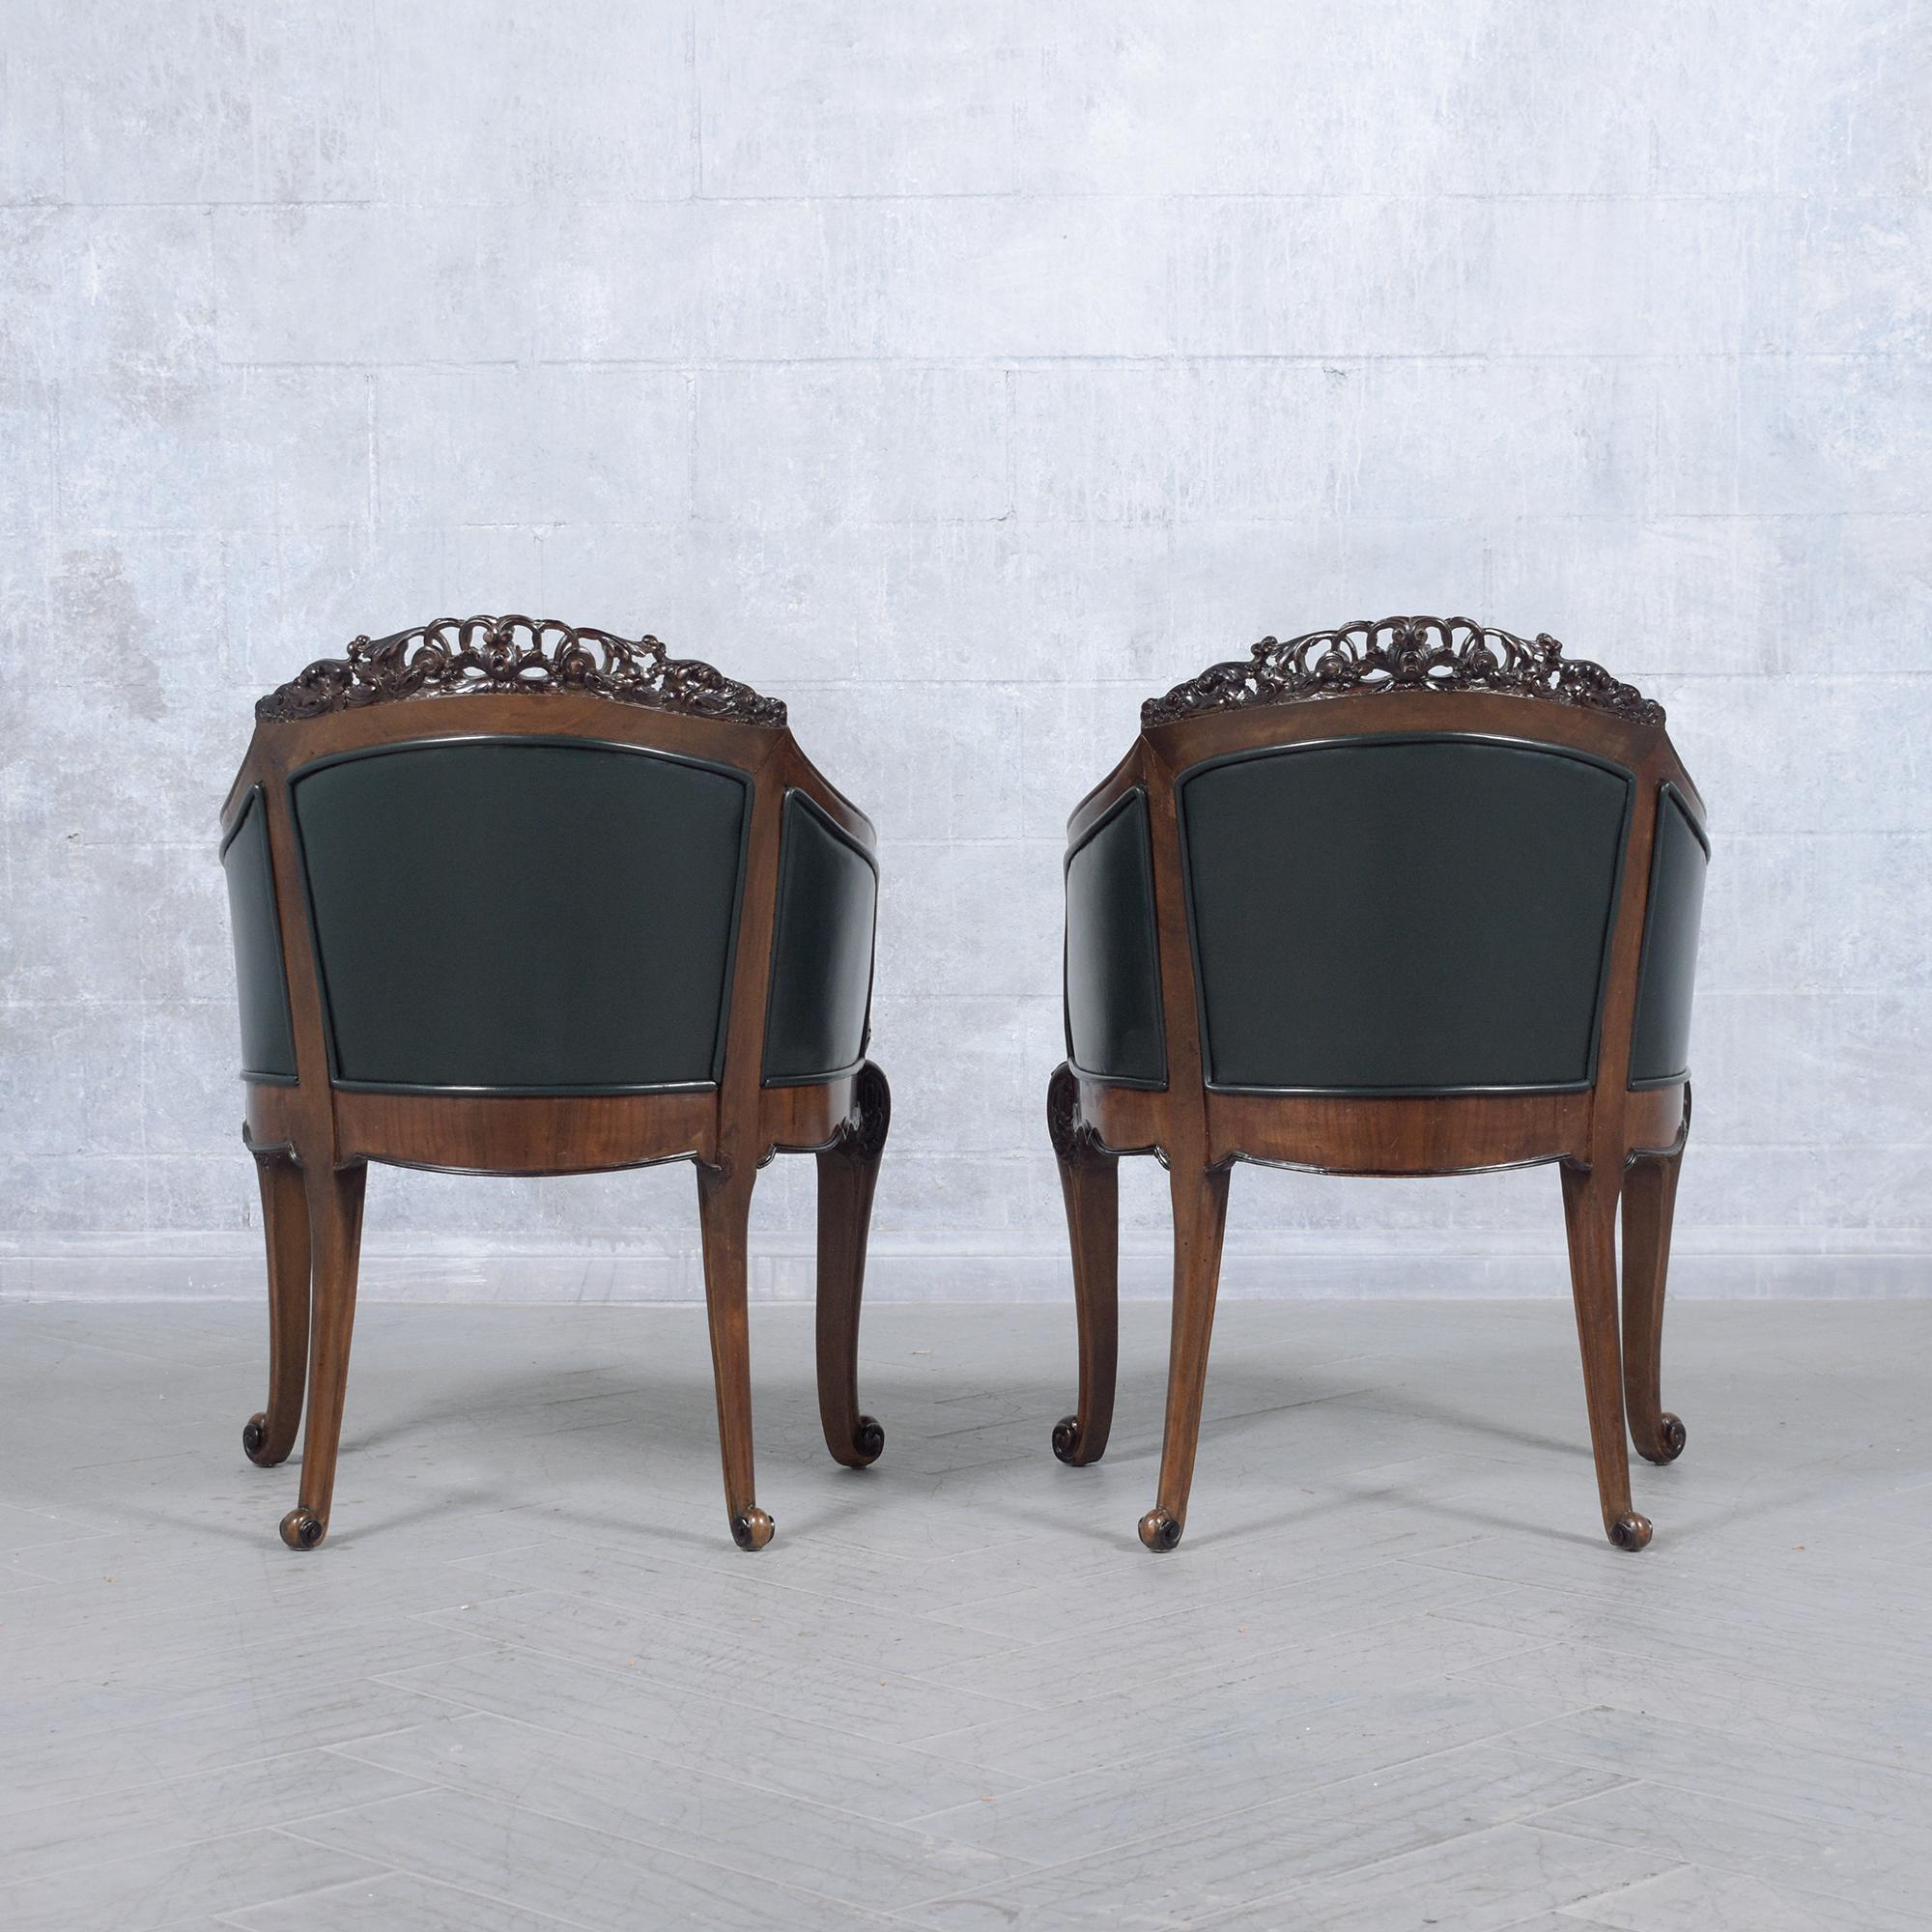 19th-Century English Chinoiserie Bergères: Restored Elegance in Green Leather For Sale 1